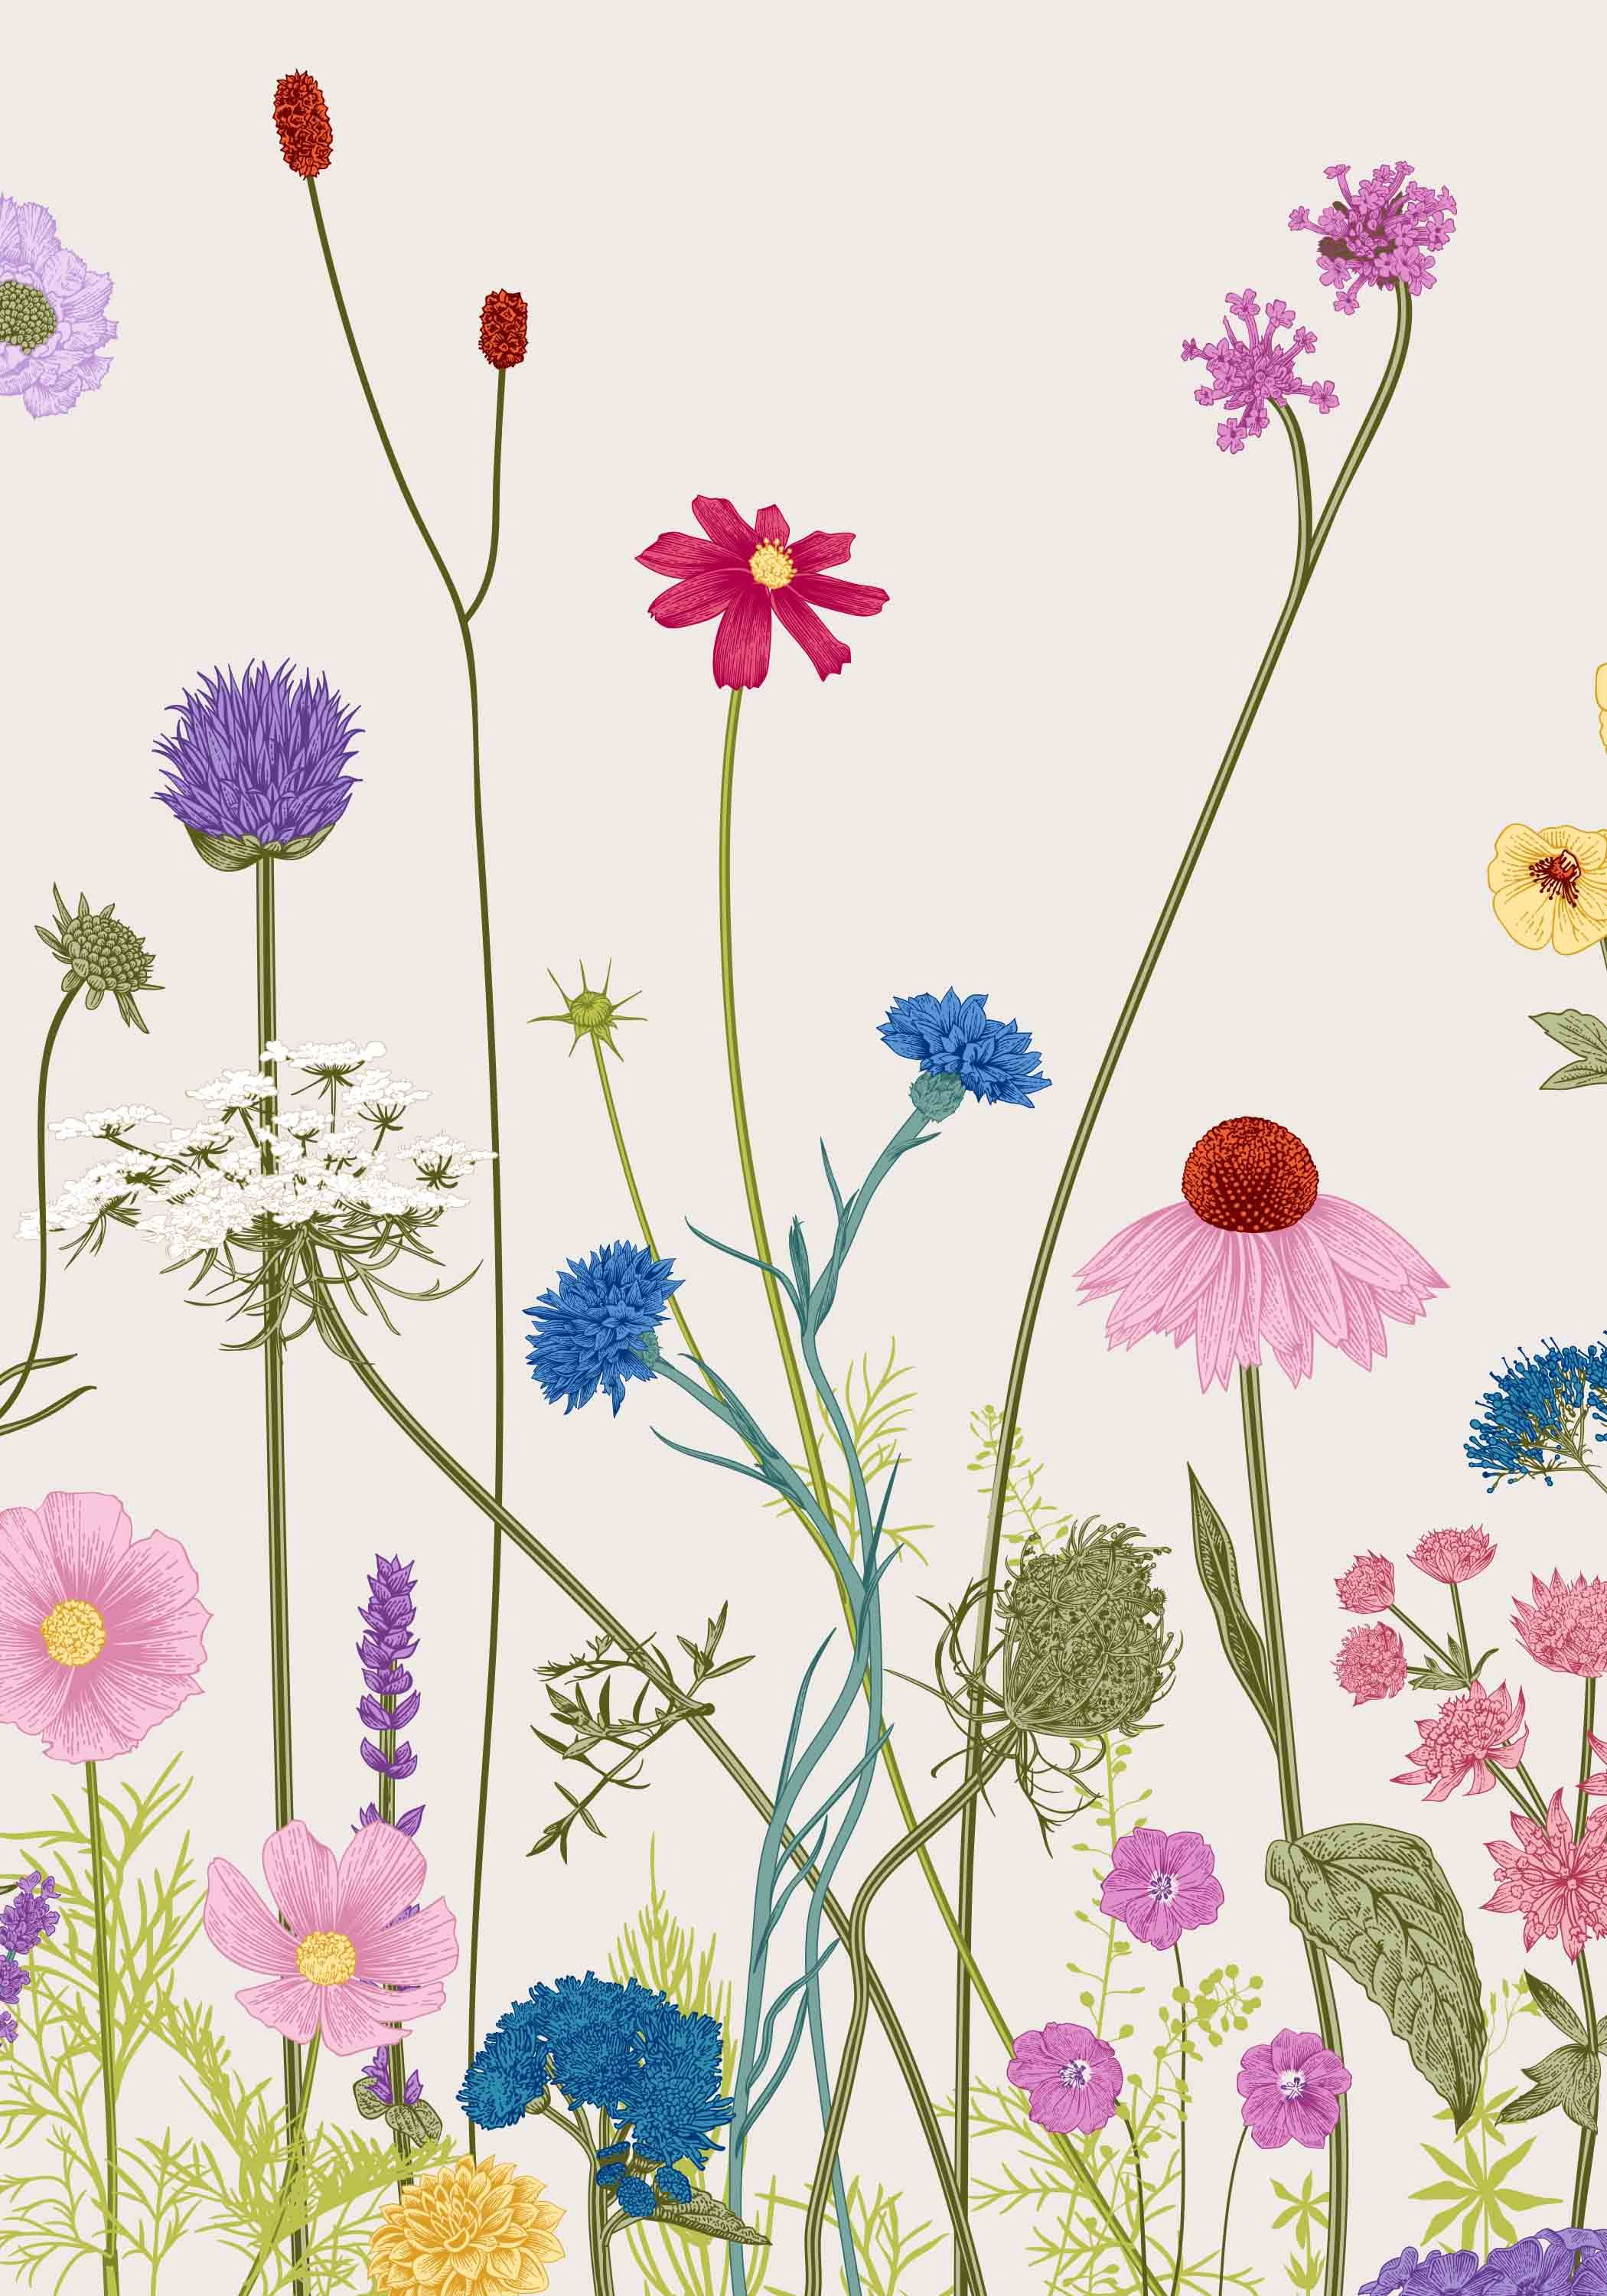 2100x3000 Tall Wildflowers Mural Removable Self Adhesive Wallpaper Etsy | Wildflower mural, Self adhesive wallpaper, Mural